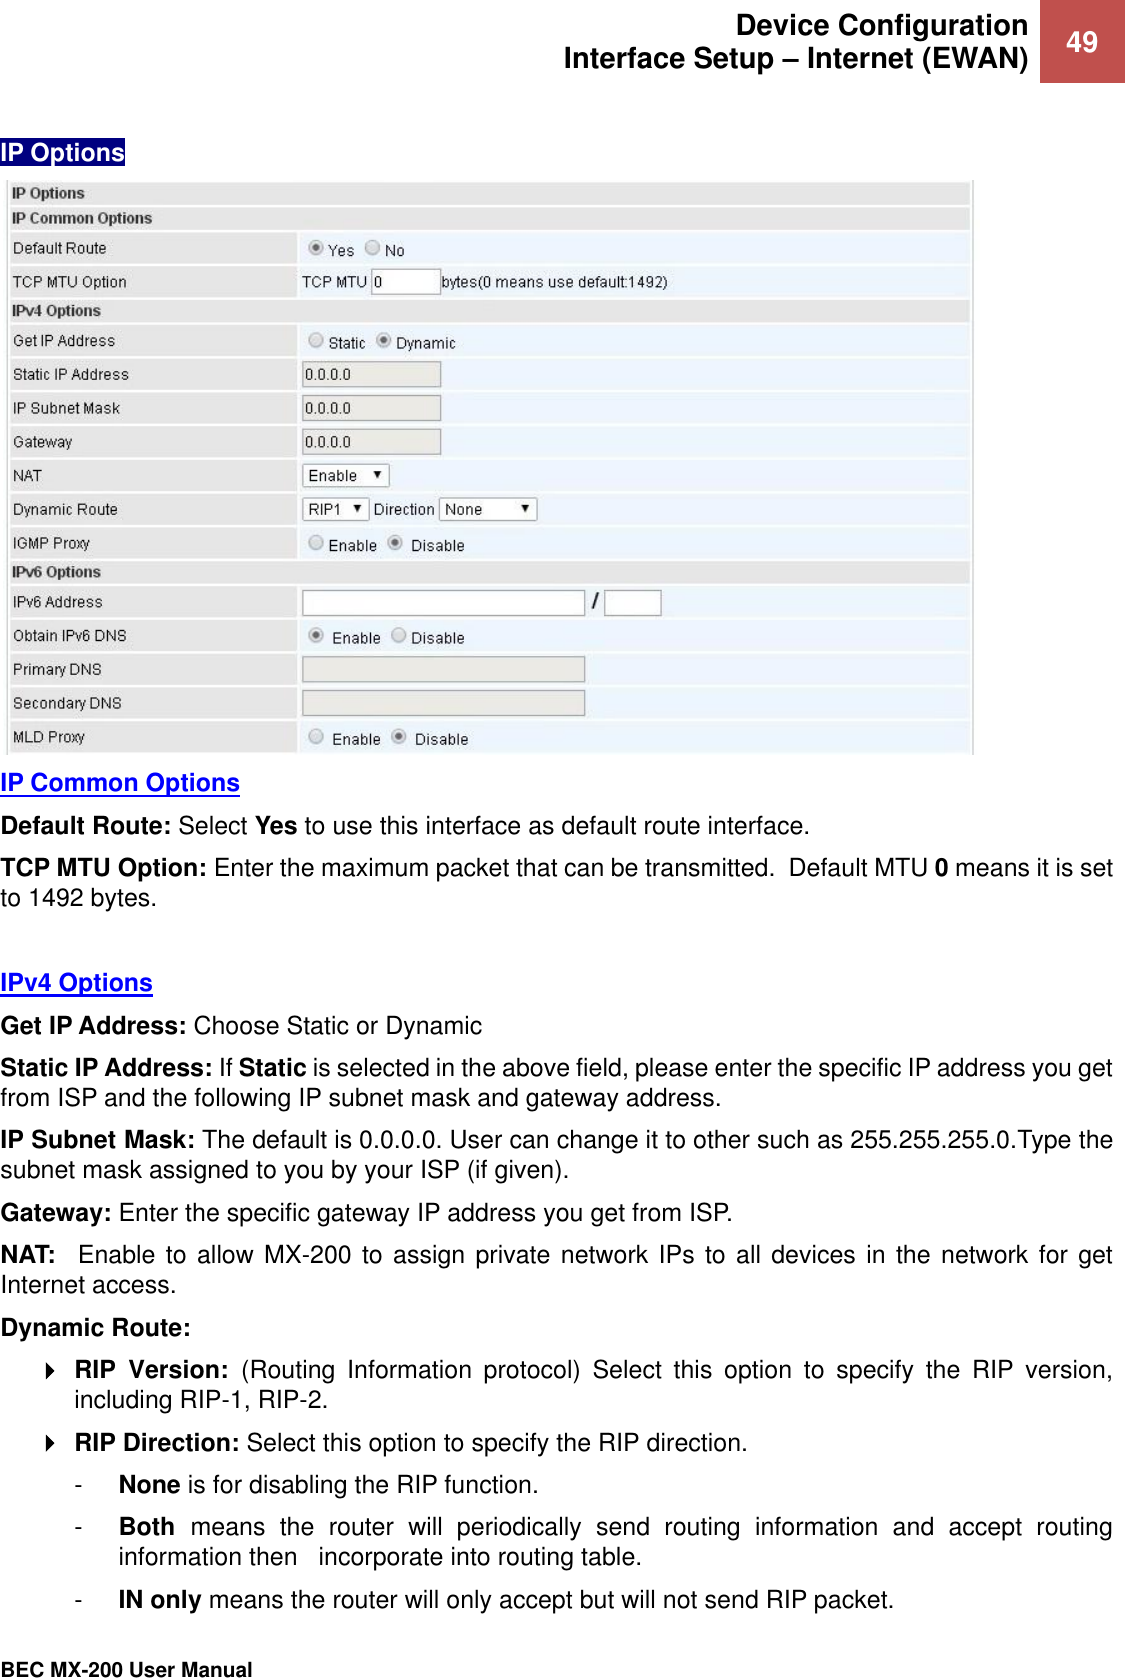 Device Configuration Interface Setup – Internet (EWAN) 49   BEC MX-200 User Manual  IP Options  IP Common Options Default Route: Select Yes to use this interface as default route interface. TCP MTU Option: Enter the maximum packet that can be transmitted.  Default MTU 0 means it is set to 1492 bytes.    IPv4 Options Get IP Address: Choose Static or Dynamic Static IP Address: If Static is selected in the above field, please enter the specific IP address you get from ISP and the following IP subnet mask and gateway address. IP Subnet Mask: The default is 0.0.0.0. User can change it to other such as 255.255.255.0.Type the subnet mask assigned to you by your ISP (if given). Gateway: Enter the specific gateway IP address you get from ISP. NAT:    Enable to allow MX-200 to assign private network IPs to all devices in the  network for get Internet access. Dynamic Route:   RIP  Version:  (Routing  Information  protocol)  Select  this  option  to  specify  the  RIP  version, including RIP-1, RIP-2.   RIP Direction: Select this option to specify the RIP direction.  -  None is for disabling the RIP function.  -  Both  means  the  router  will  periodically  send  routing  information  and  accept  routing information then   incorporate into routing table.  -  IN only means the router will only accept but will not send RIP packet.  